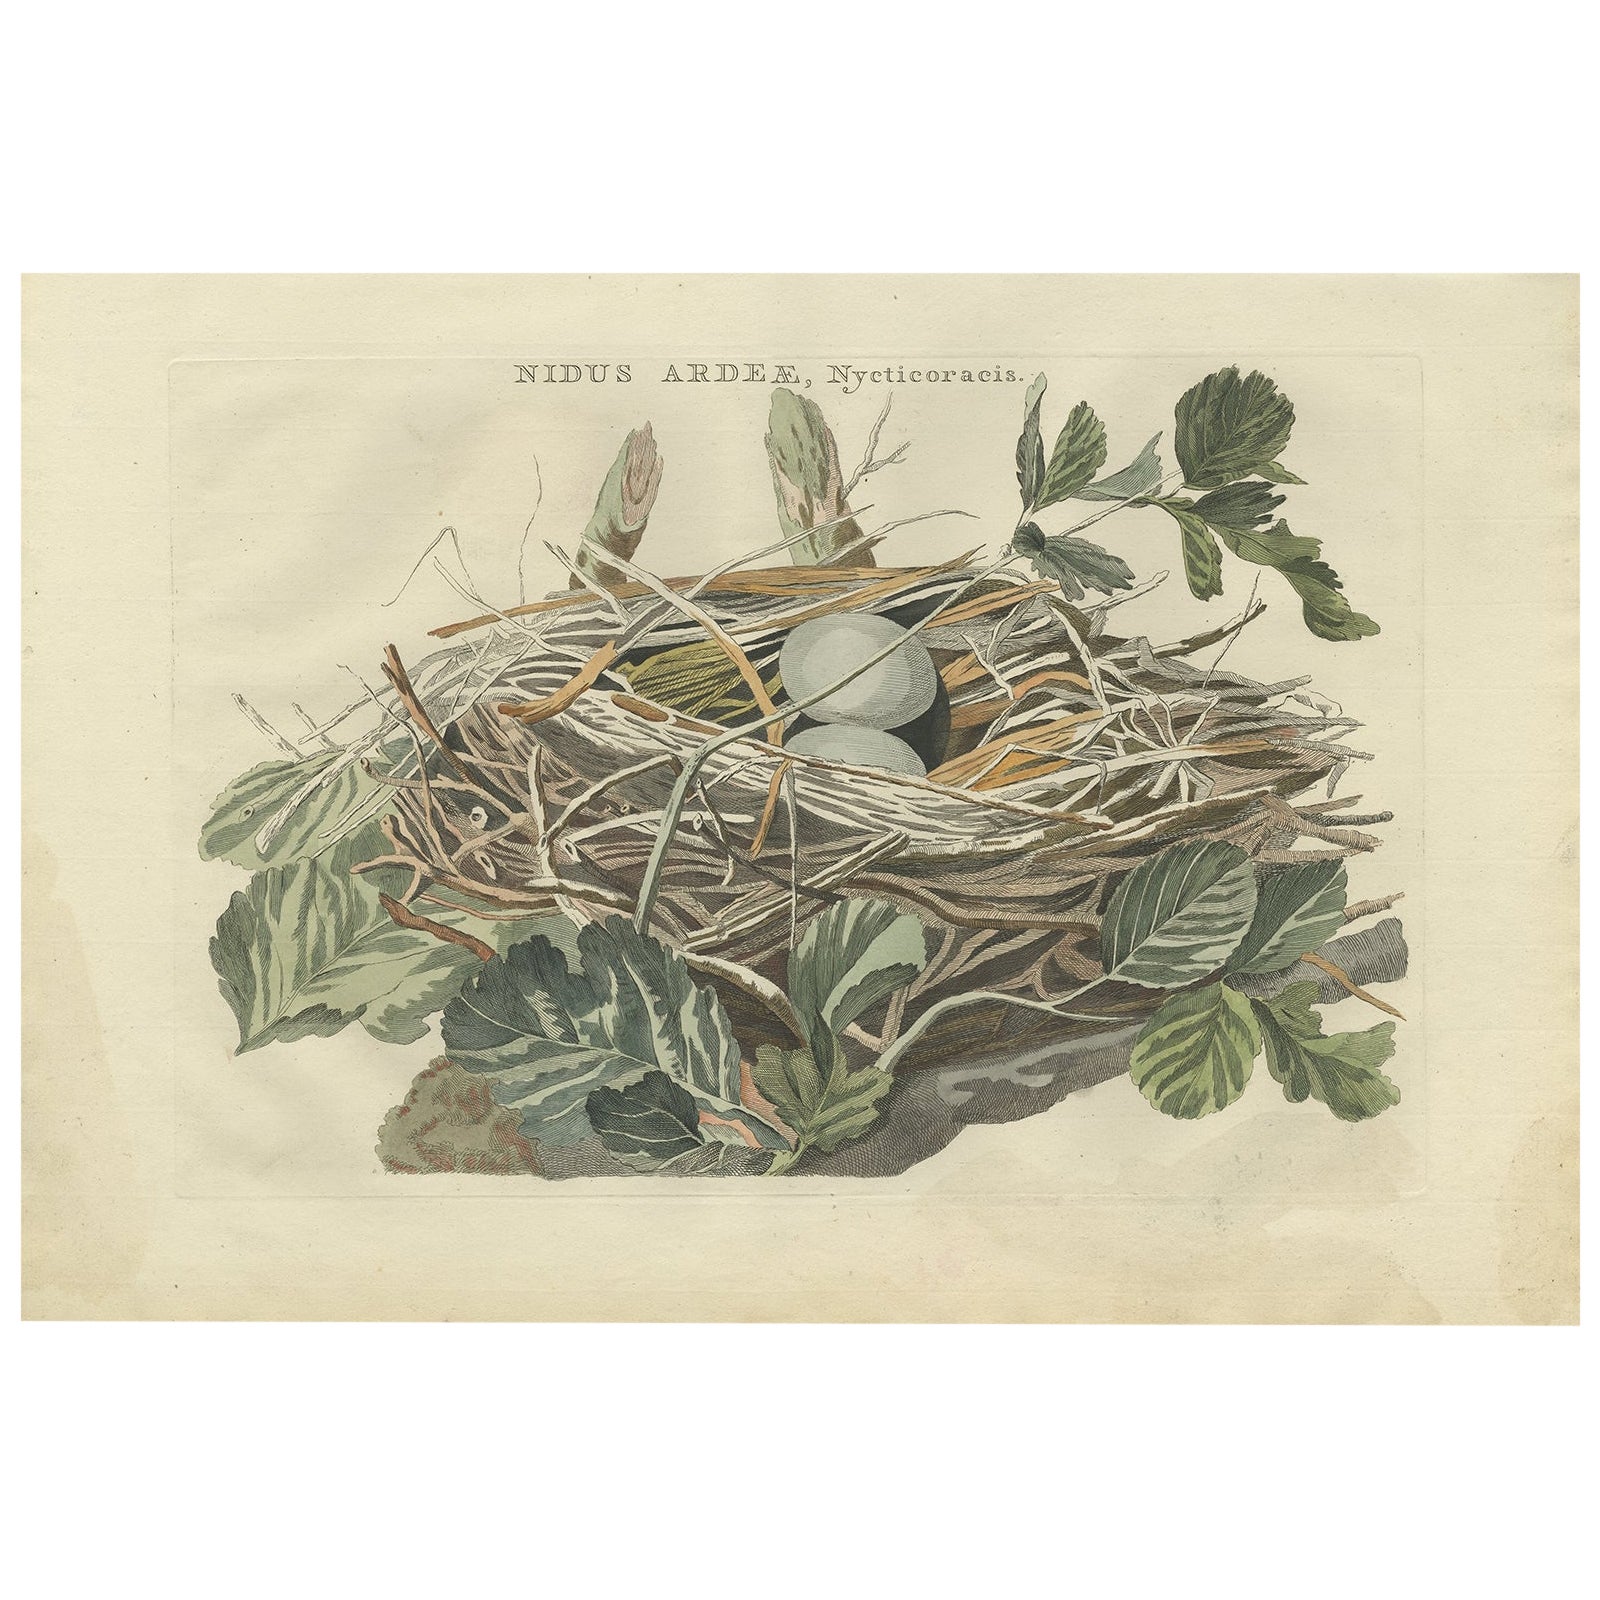 Antique Bird Print of the Nest of a Black-Crowned Night Heron by Sepp & Nozeman